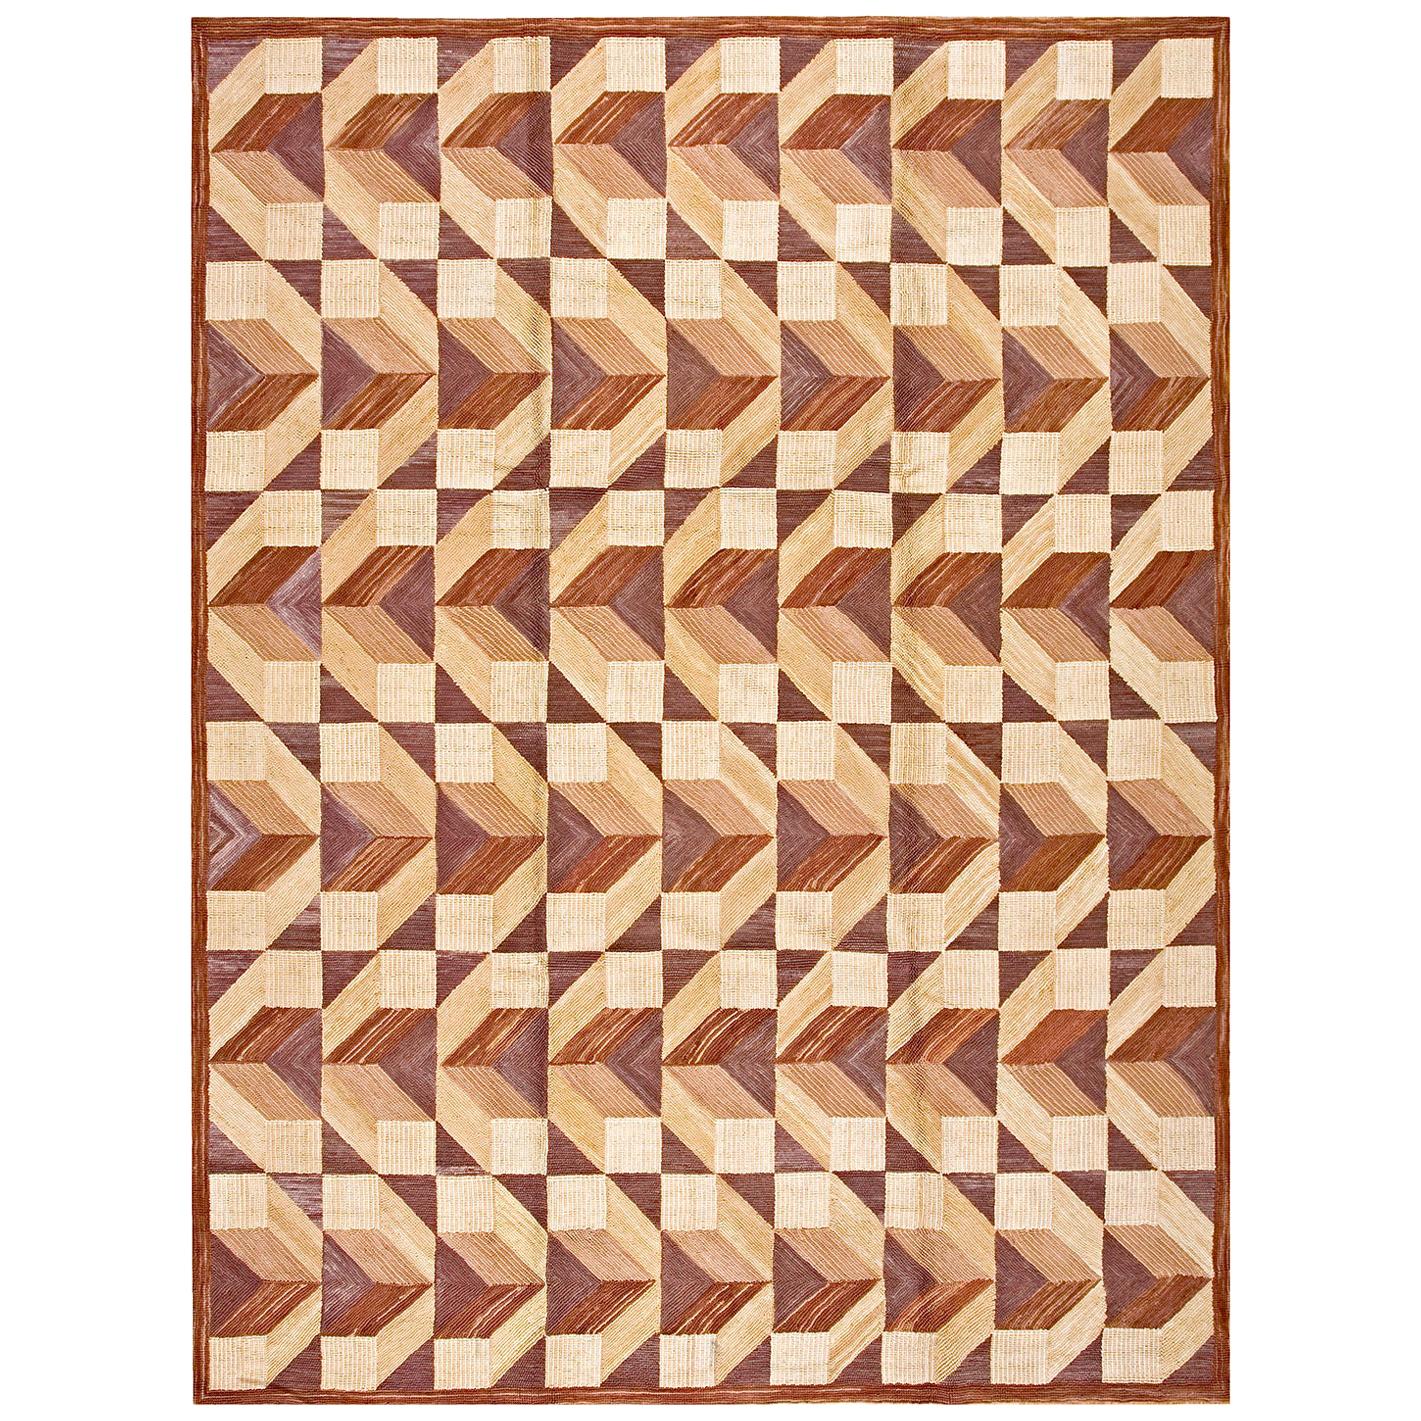 Contemporary Hooked Rug (6' x 9' - 183 x 274 )